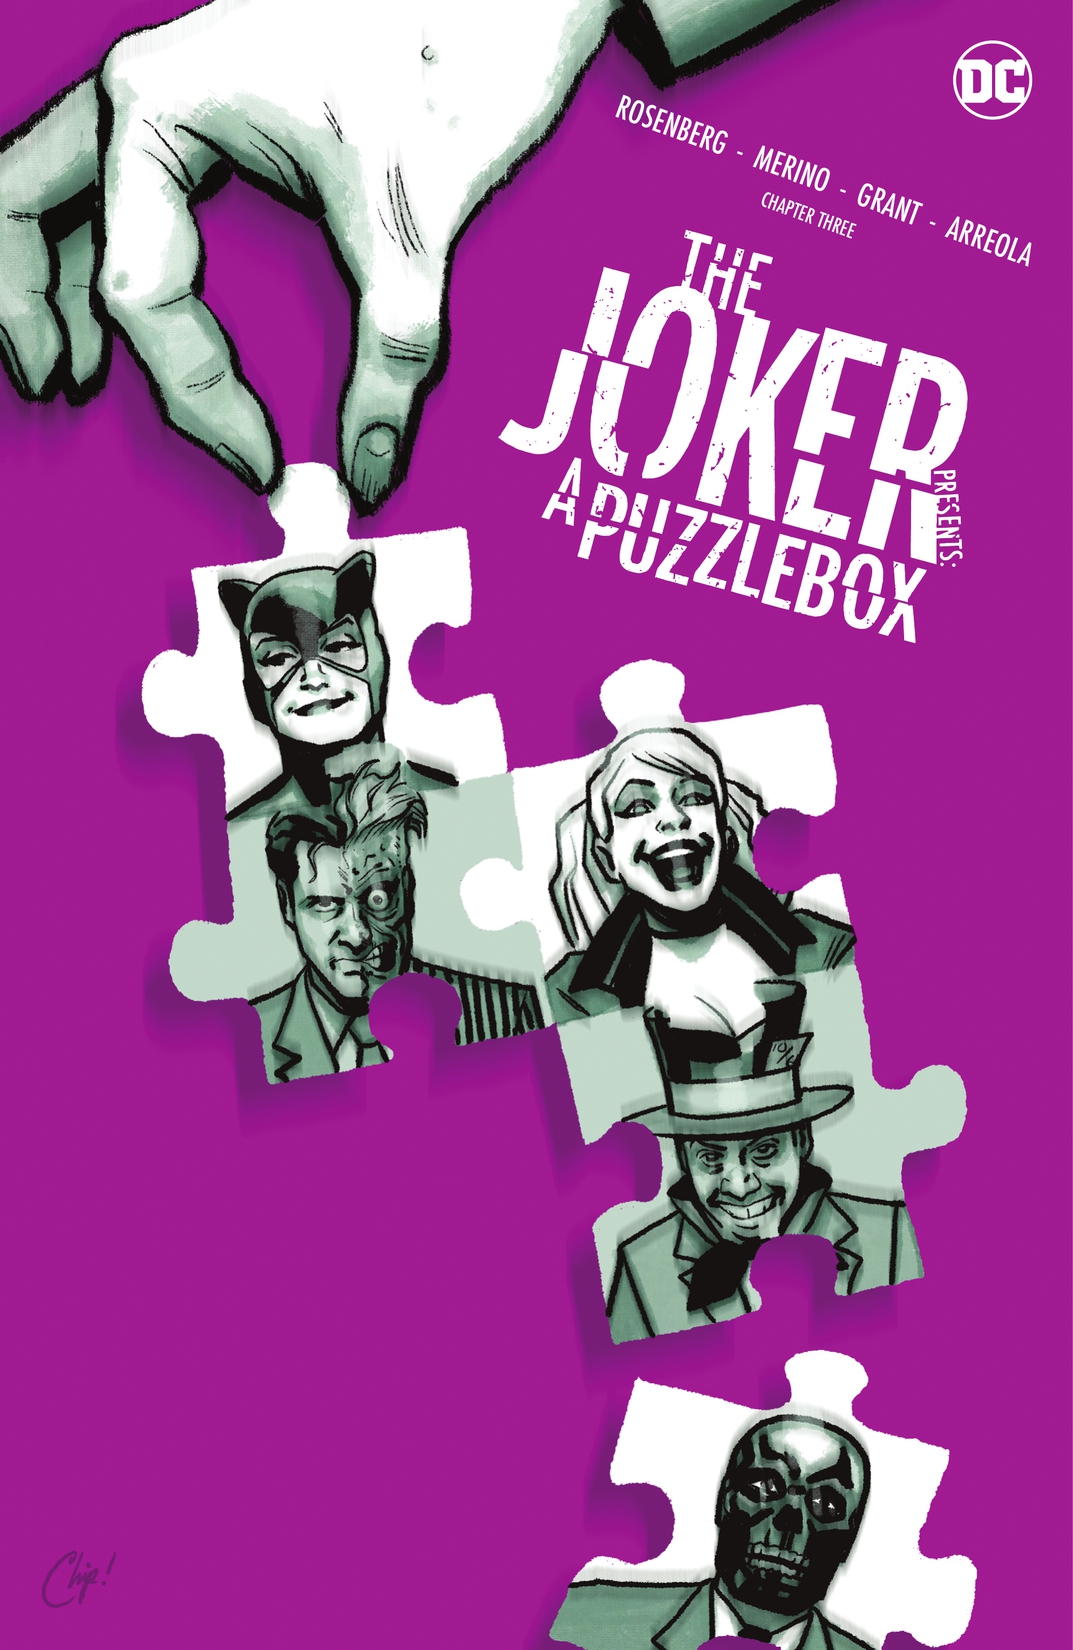 The Joker Presents: A Puzzlebox Director's Cut #3 preview images